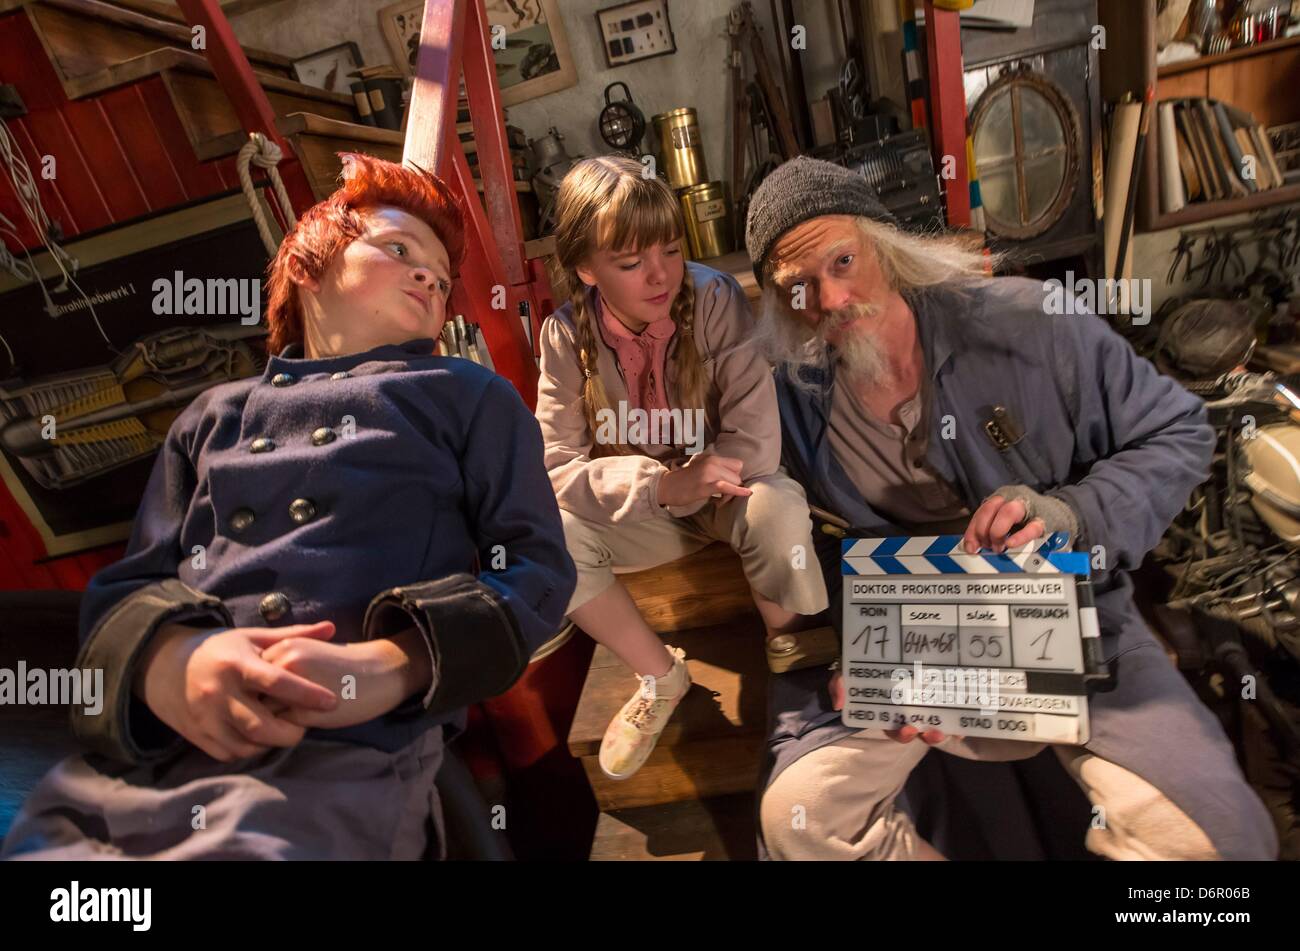 Actors ler Kristoffer Joner (Doktor Proktor, R), Emily Glaister (Lise, C) and Eilif H. Noraker (Bulle) sit on the movie set of the German-Norwegian co-production 'Dokto Proktors Pupspulver' (English translation Doctor Proctor's Fart Powder) in Erfurt, Germany, 22 April 2013. Jo Nesbos well-loved children's book about the crazy professor Doctor Proctor will be filmed in Erfurt until 07 May 2013 and then in Oslo, Norway. It should come to cinemas at the beginning of next year. Photo: MICHAEL REICHEL Stock Photo